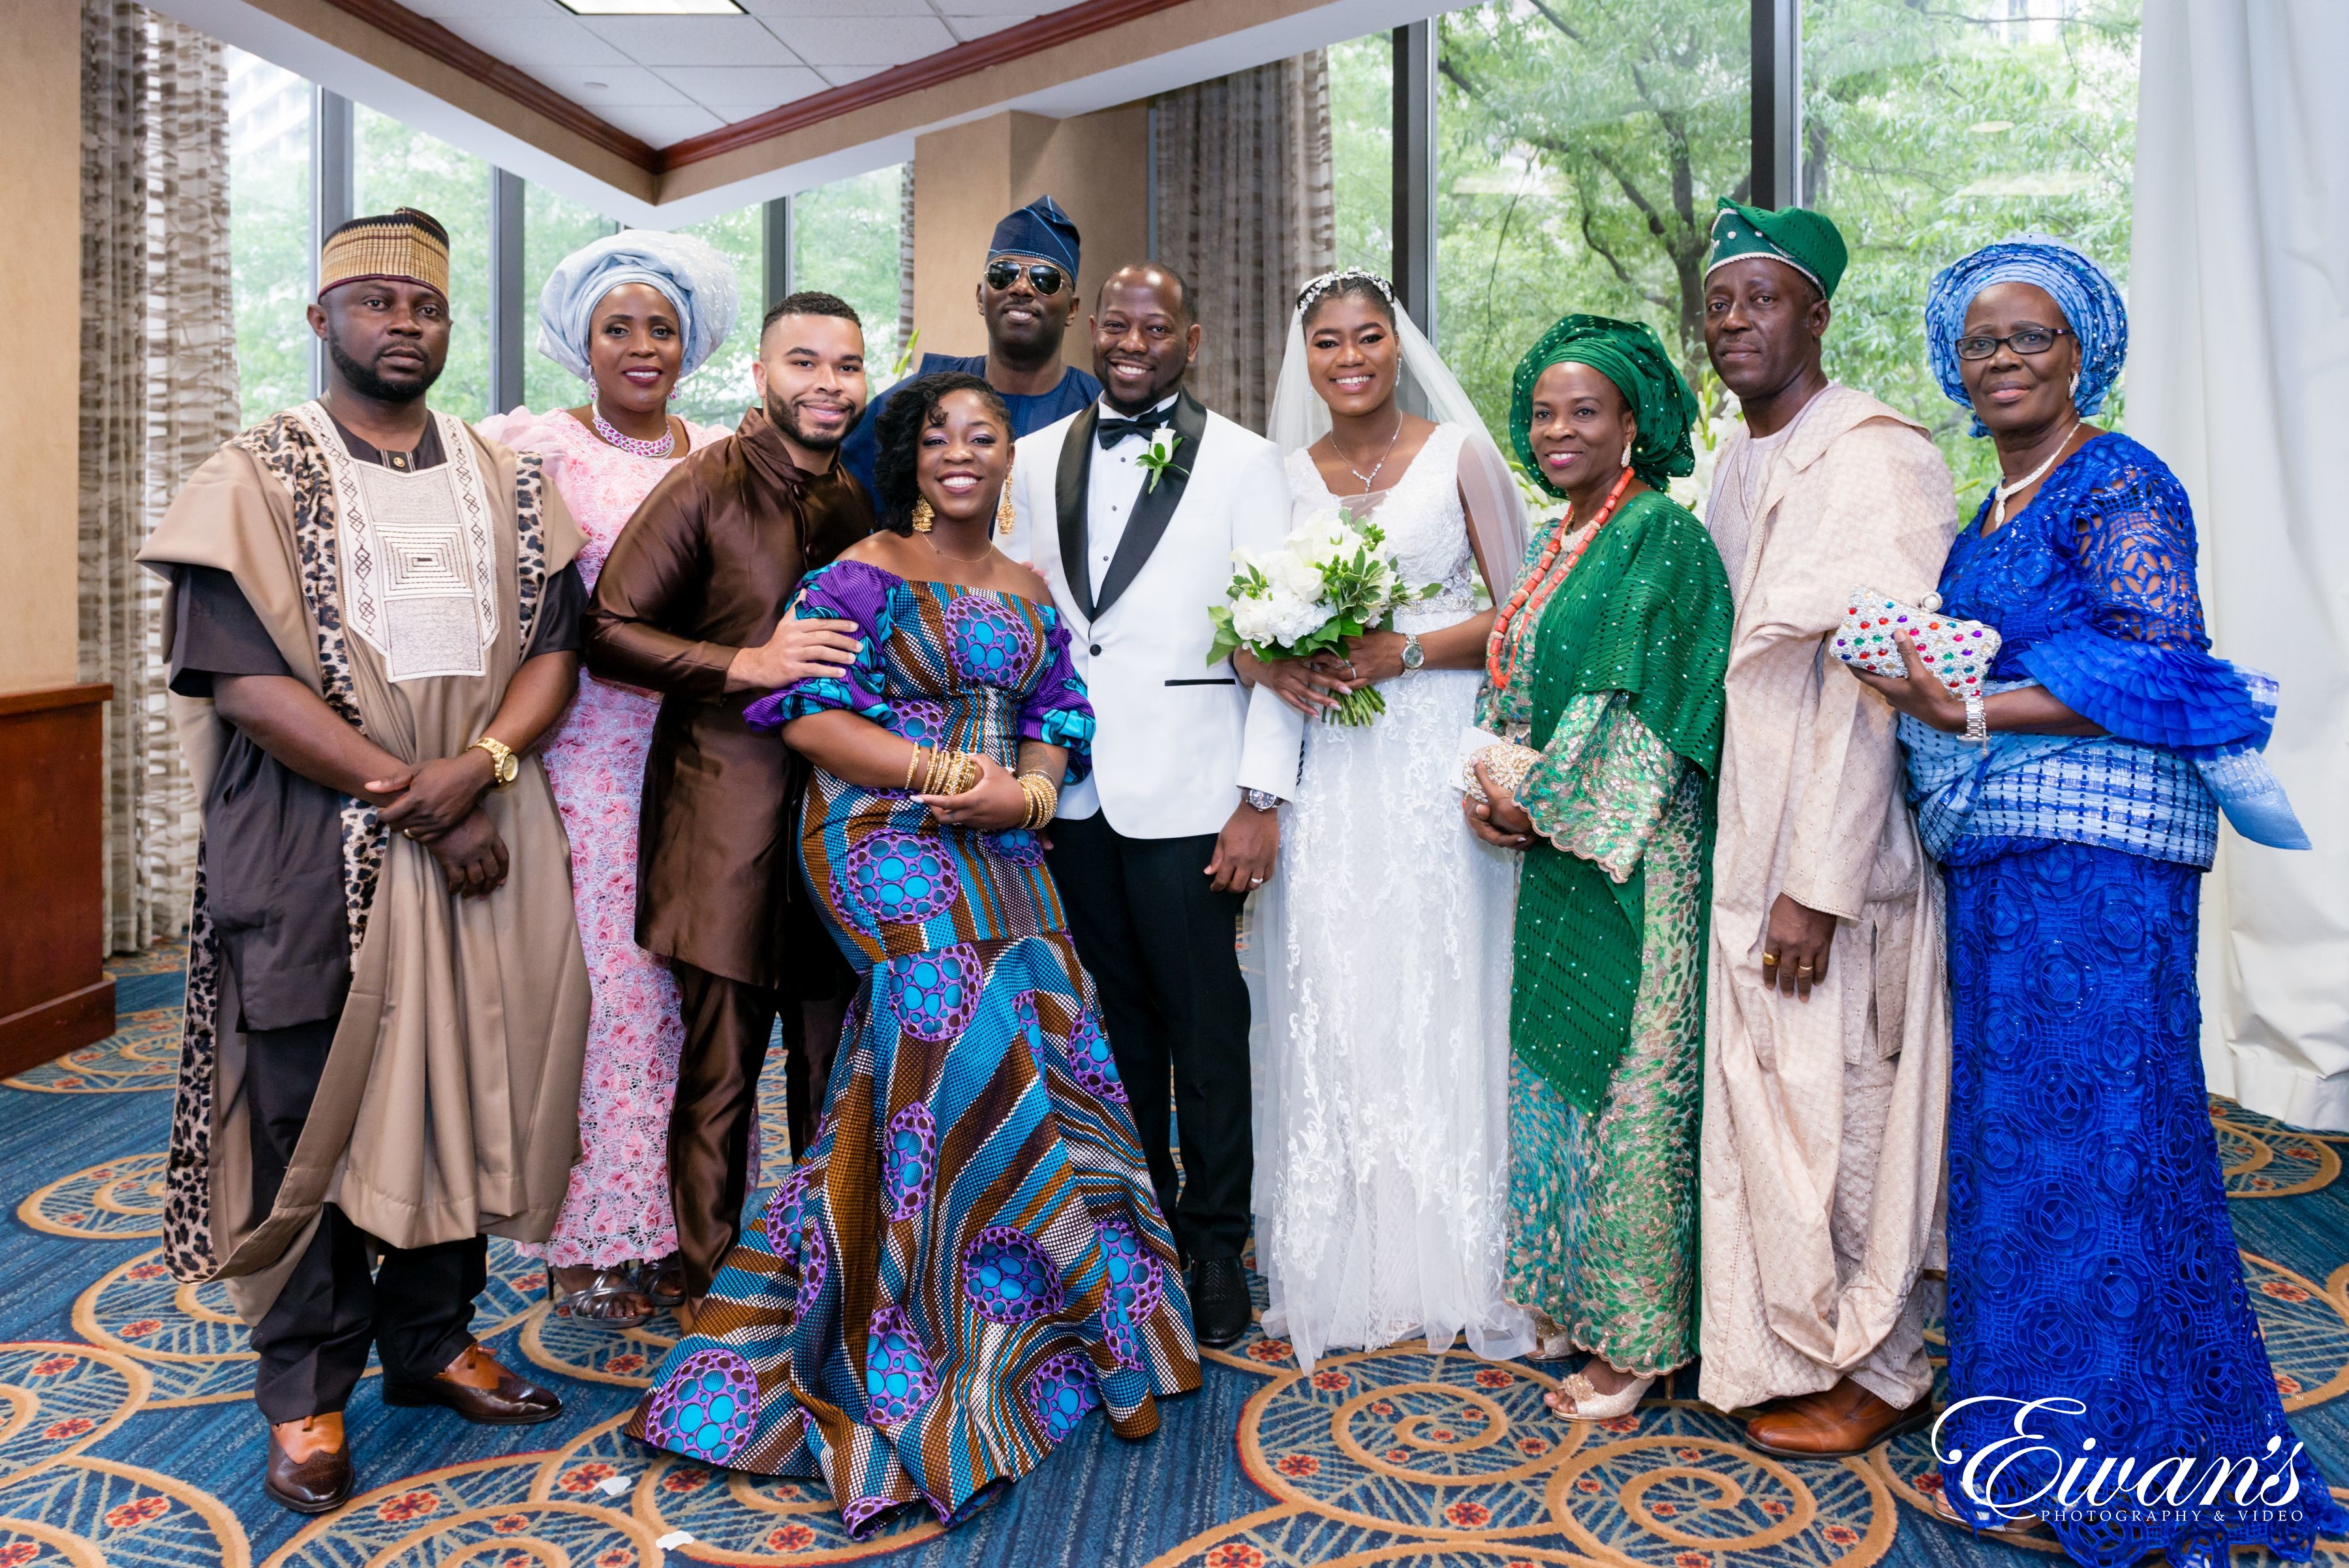 9 Nigerian Wedding Traditions to Know, According to Experts